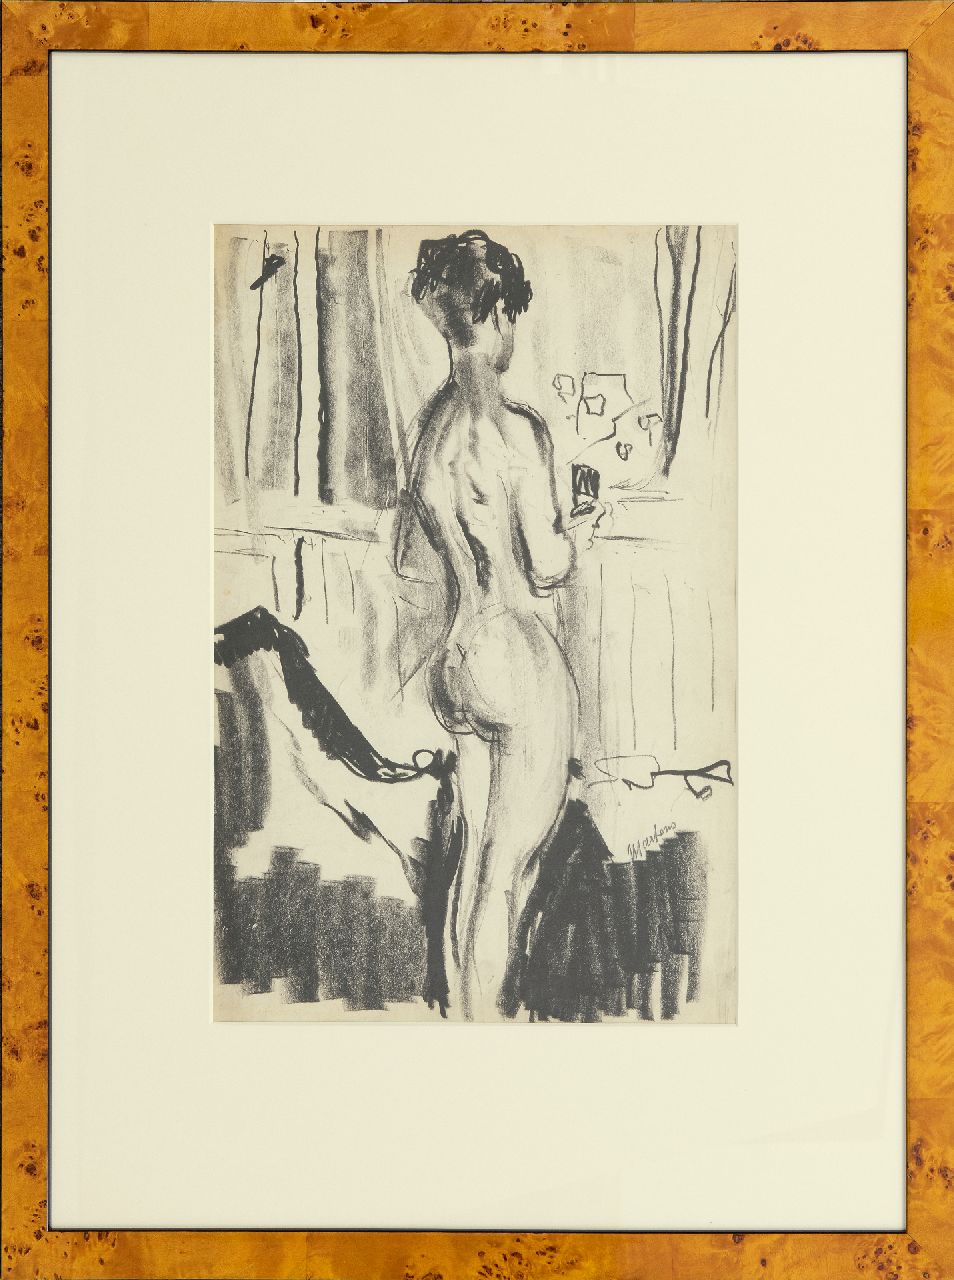 Martens G.G.  | Gijsbert 'George' Martens, Nude, seen from the back, in the artist's studio, black chalk on paper 48.0 x 32.5 cm, signed r.c. and painted ca. 1931